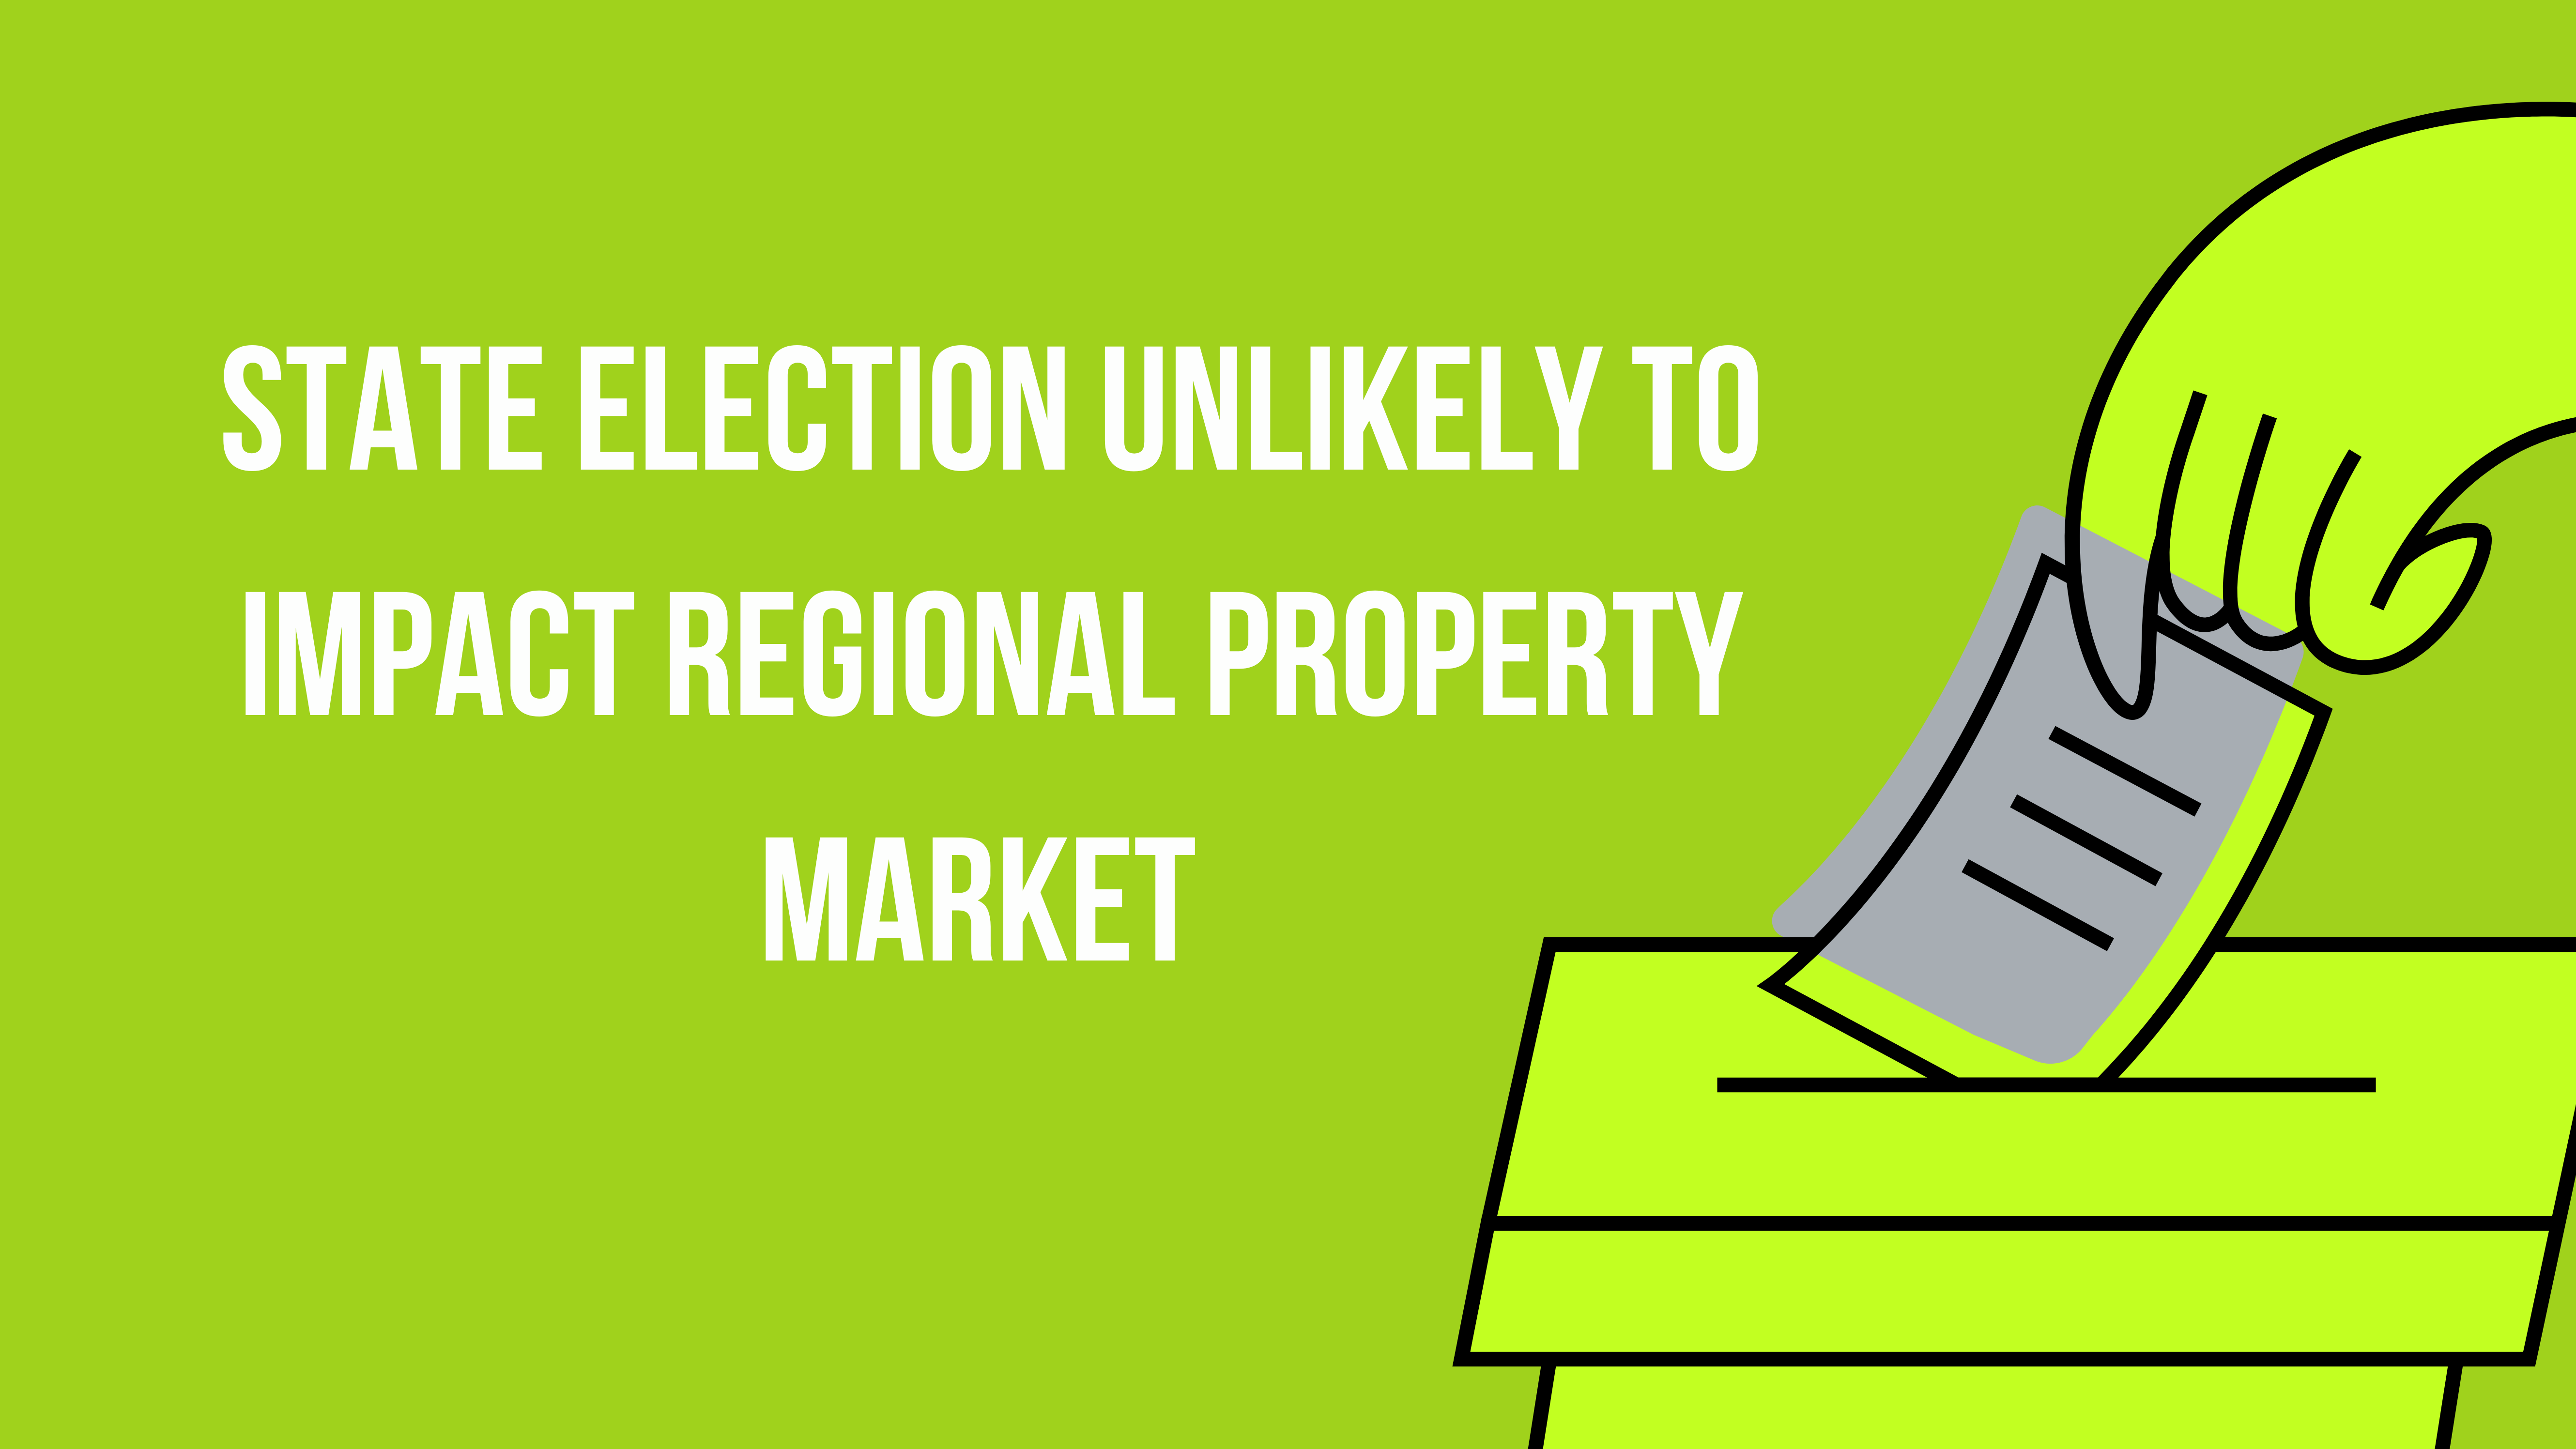 State Election unlikely to impact regional property market 